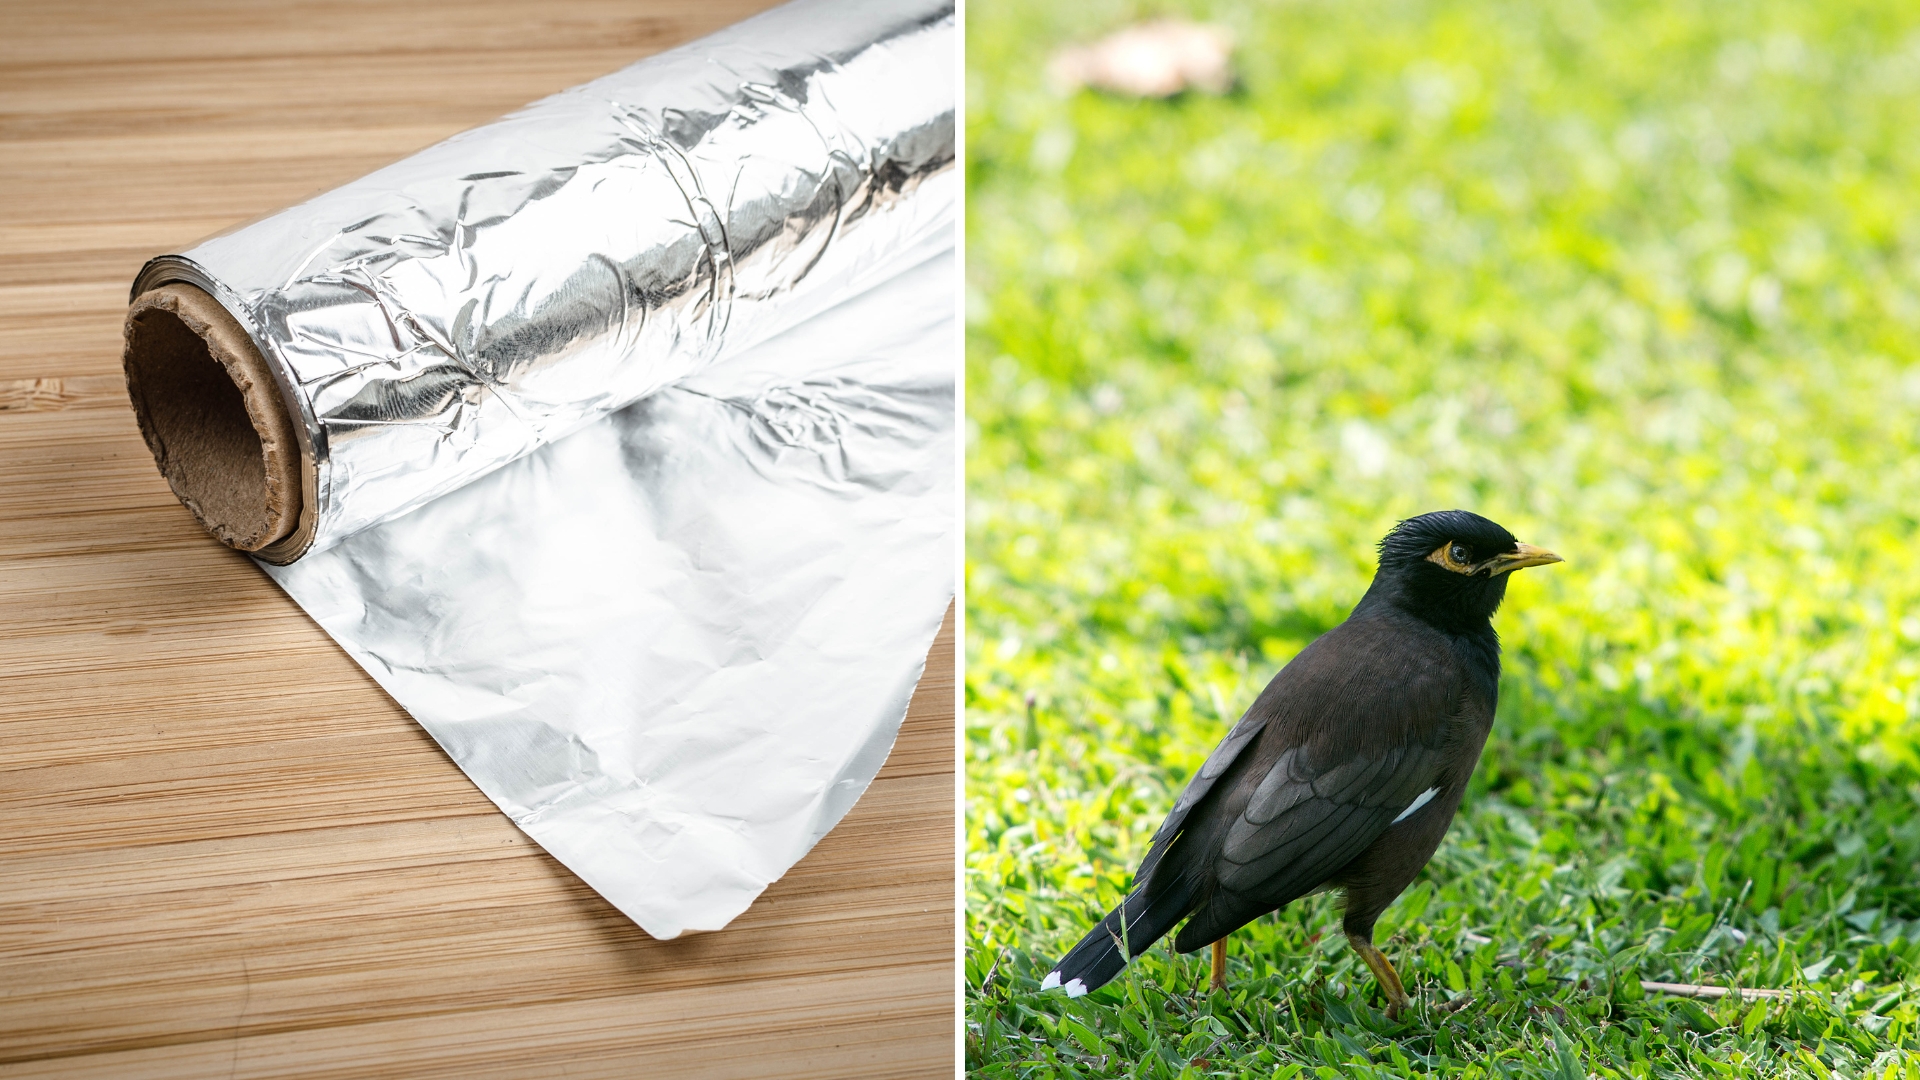 Find Out If Aluminum Foil Will Really Keep Birds From Eating Your Grass Seed